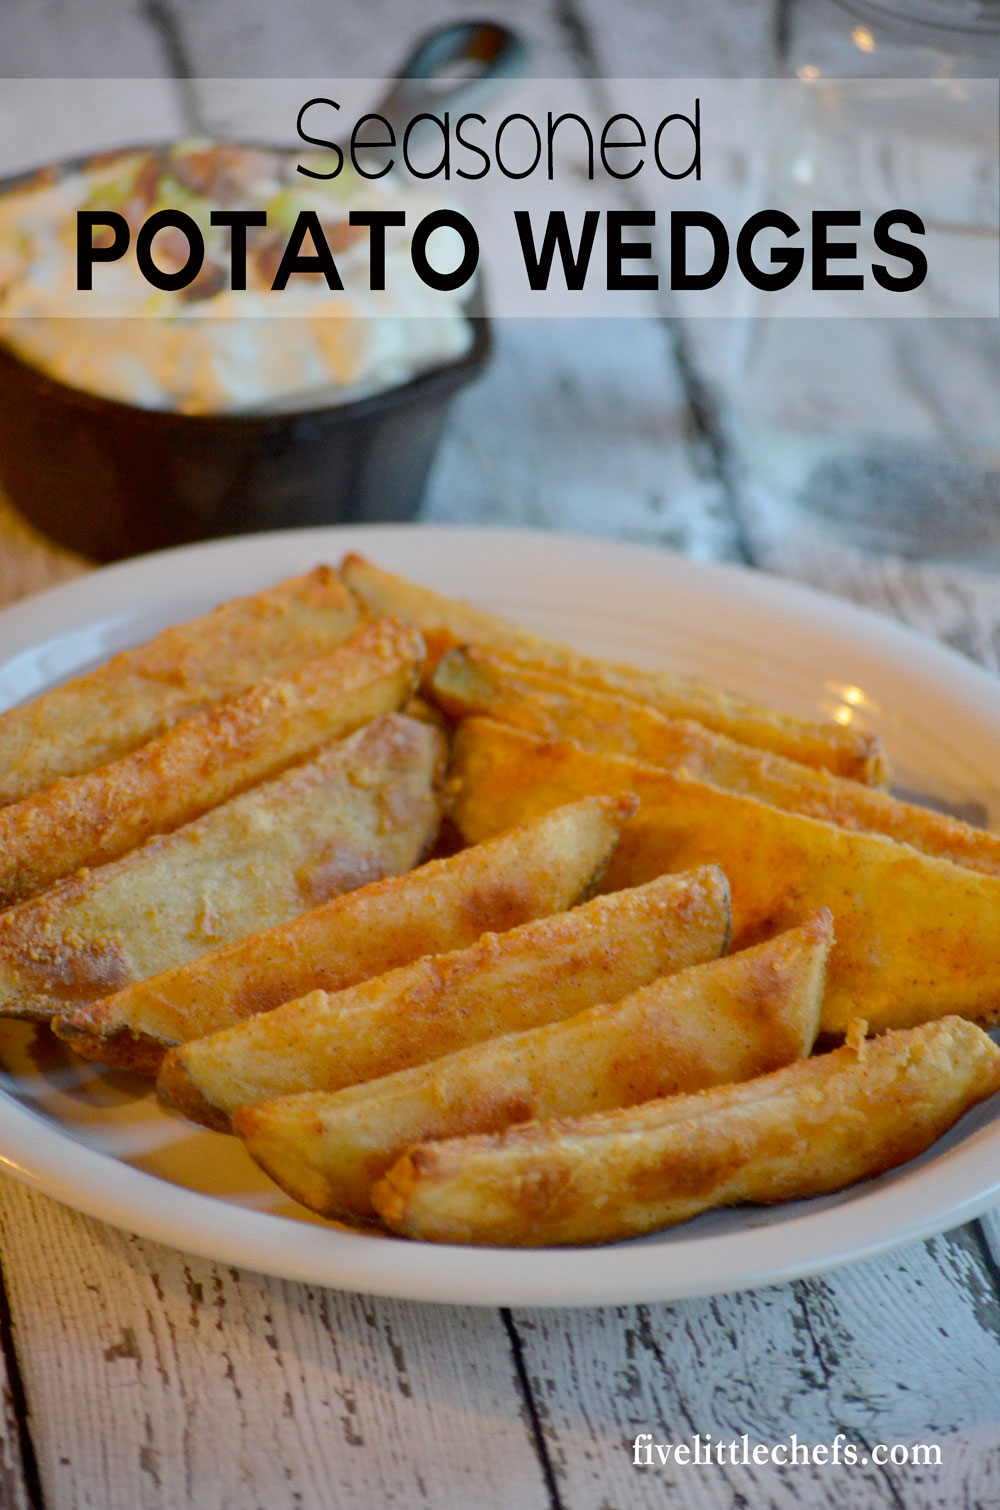 Seasoned potato wedges recipes are baked in the oven until crispy. A simple, cheap side dish or appetizer that can be served with sour cream or your favorite dipping sauces.